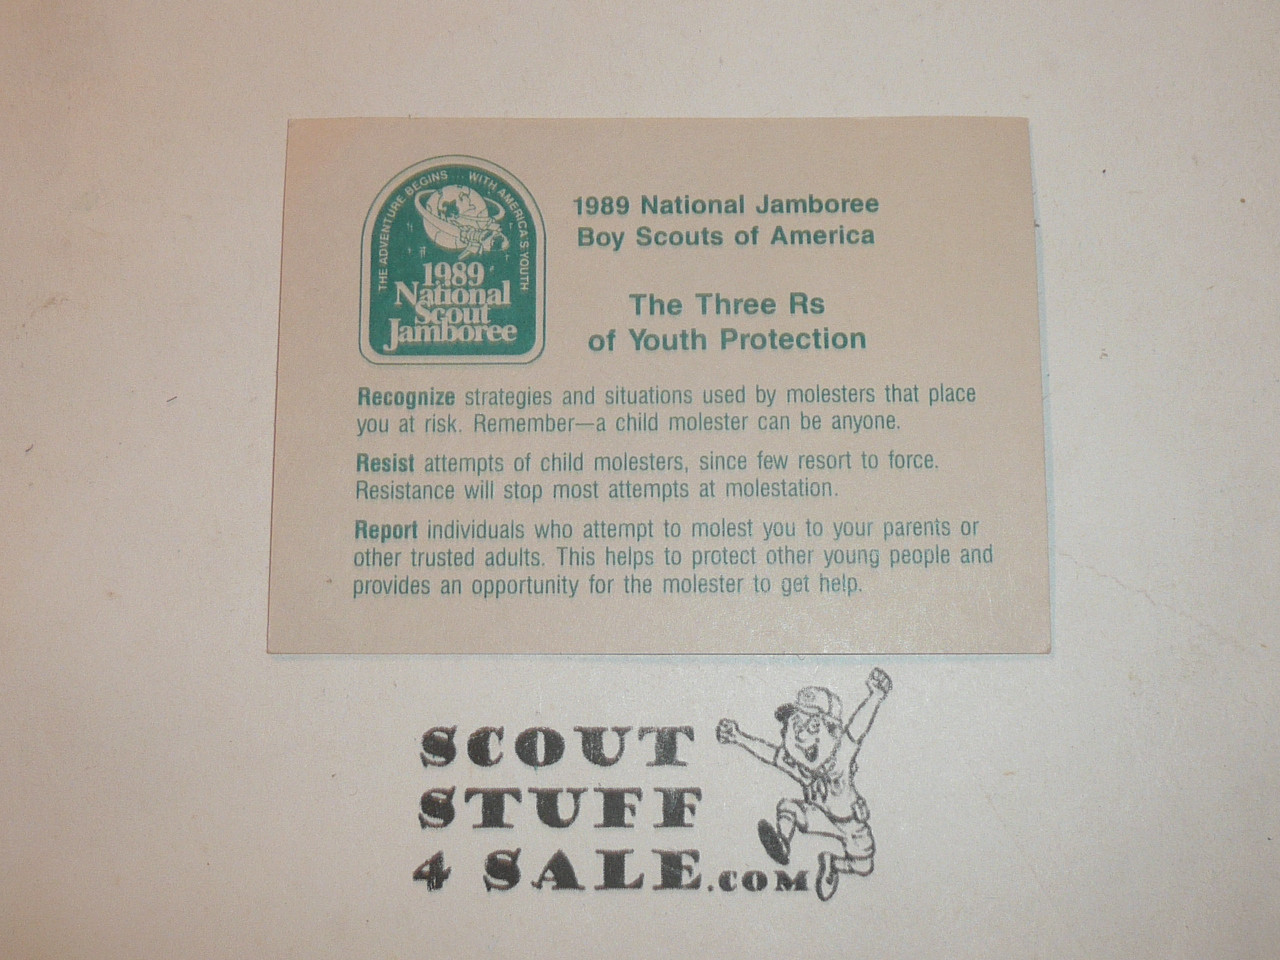 1989 National Jamboree 3 R's of Youth Protection Card